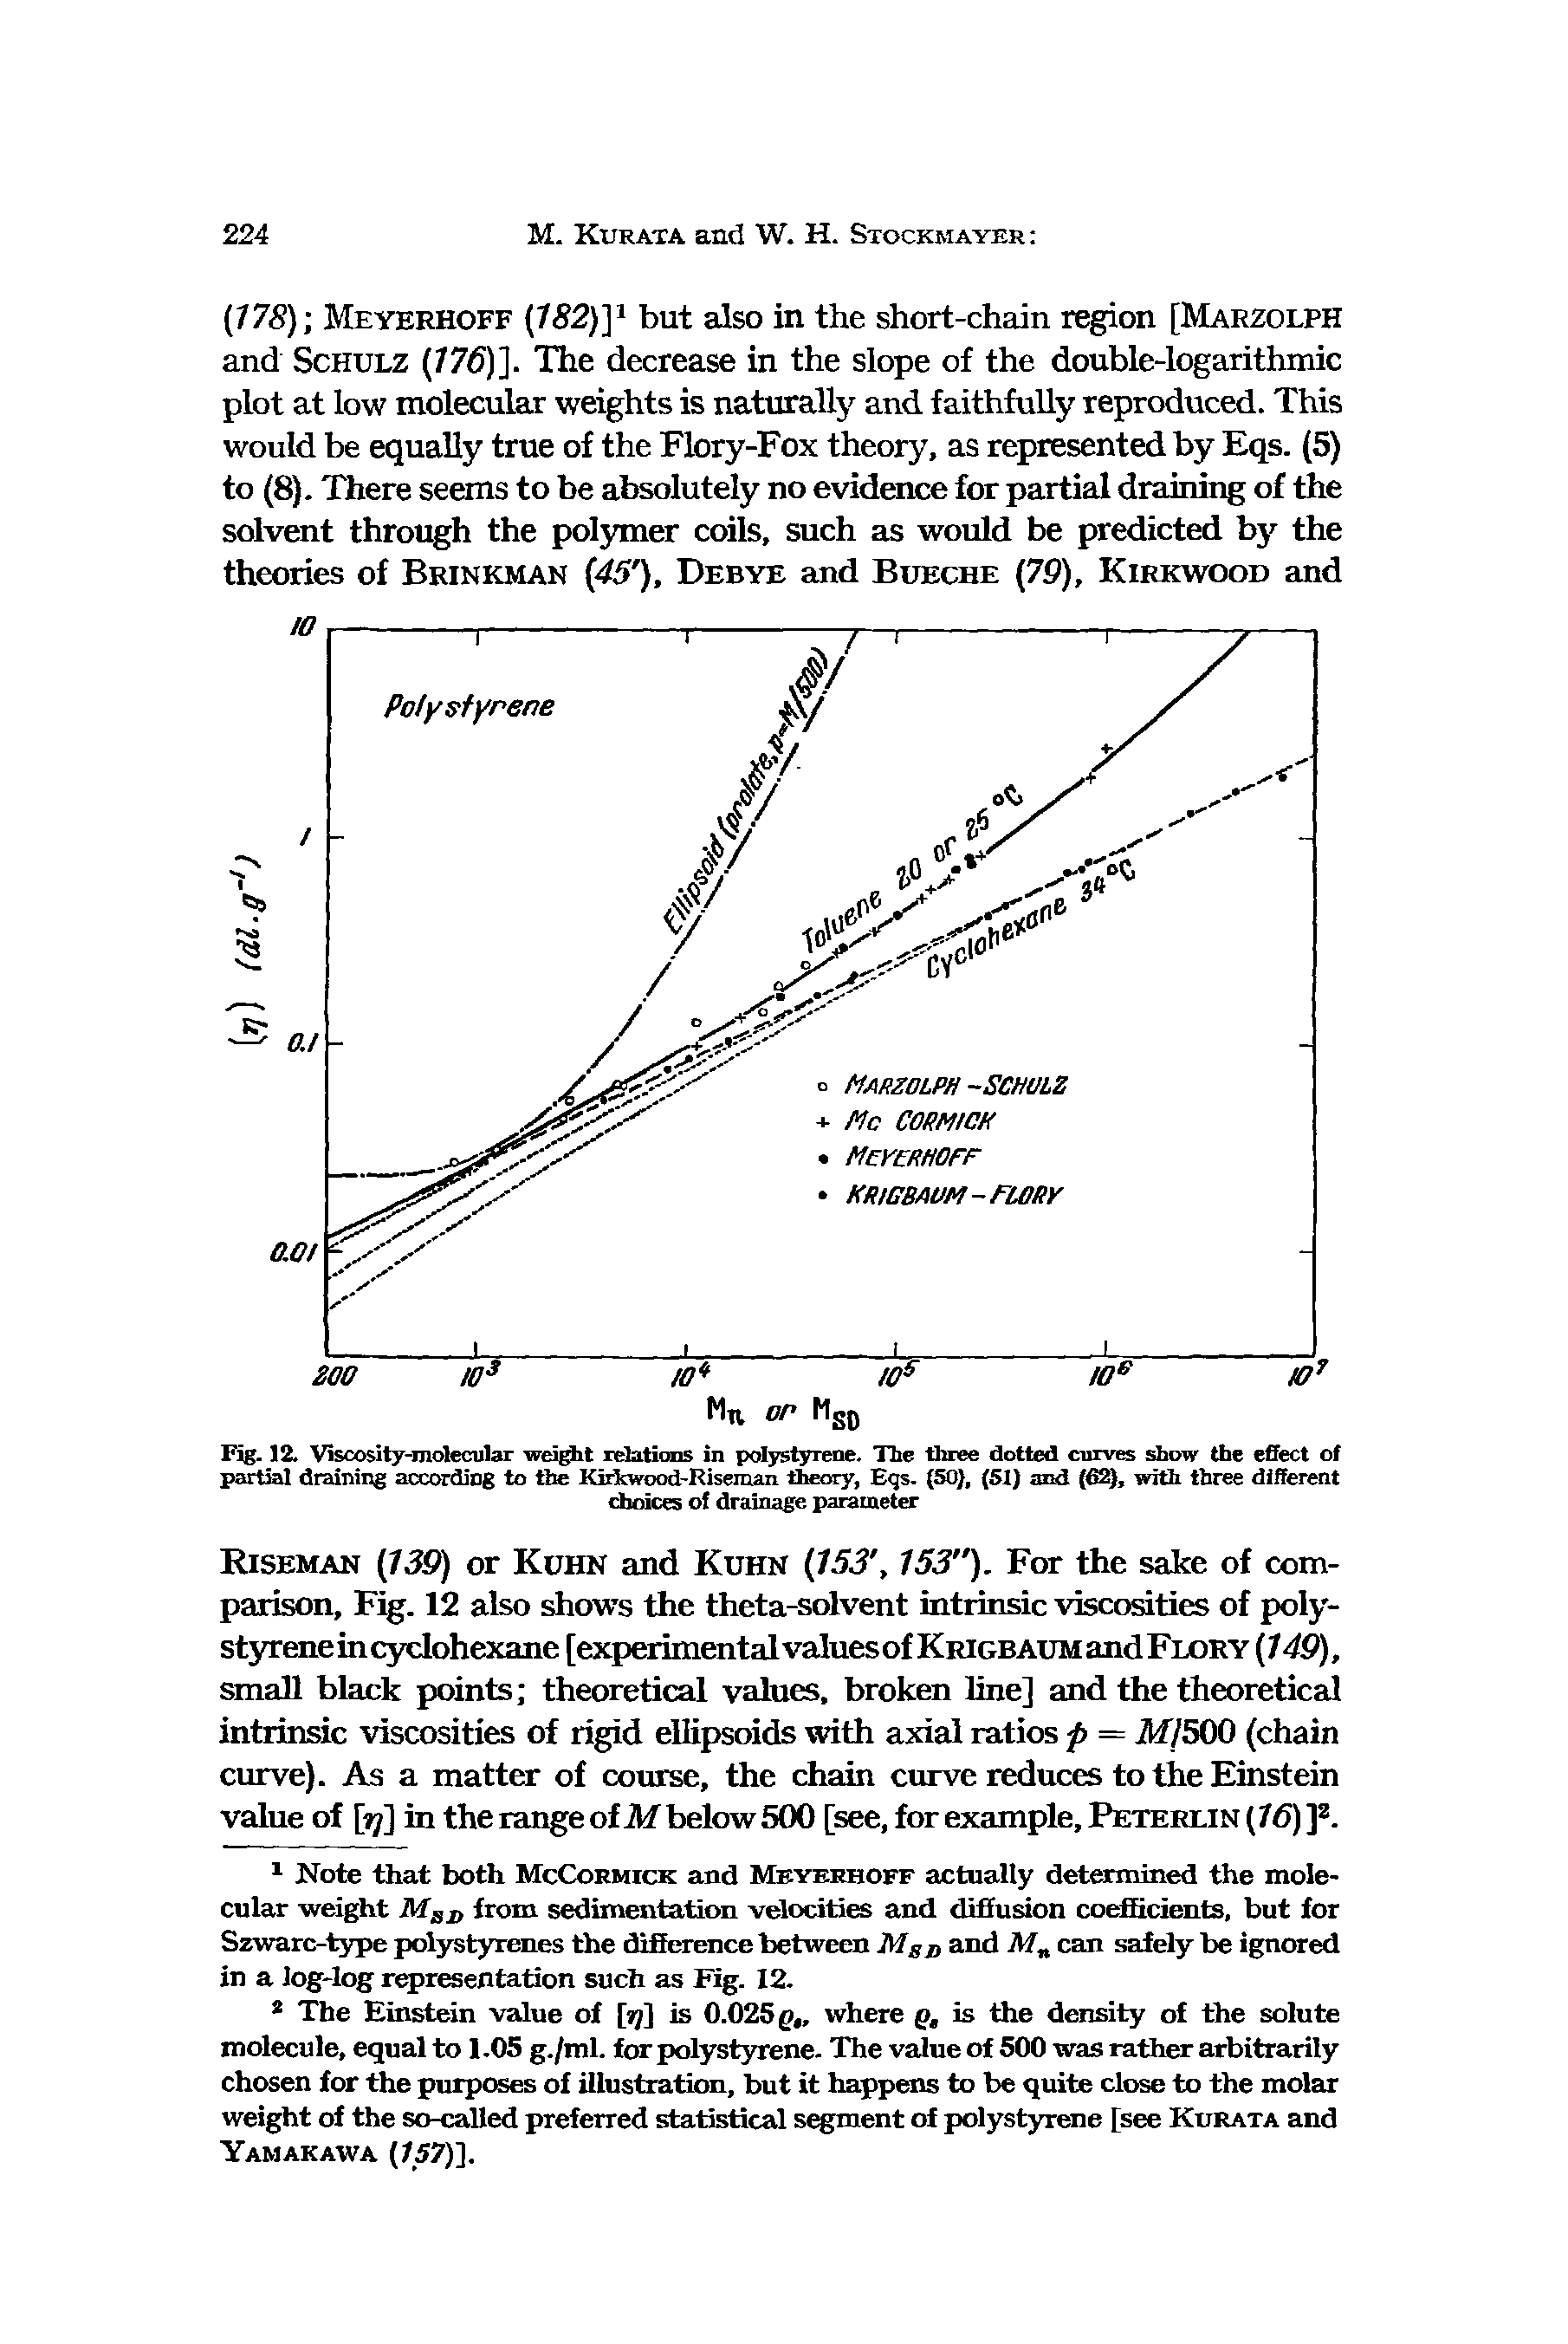 Fig. 12. Viscosity-molecular weight relations in polystyrene. The three dotted curves show the effect of partial draining according to the Kirkwood-Riseman theory, Eqs. (50), (51) and (62), with three different choices of drainage parameter...